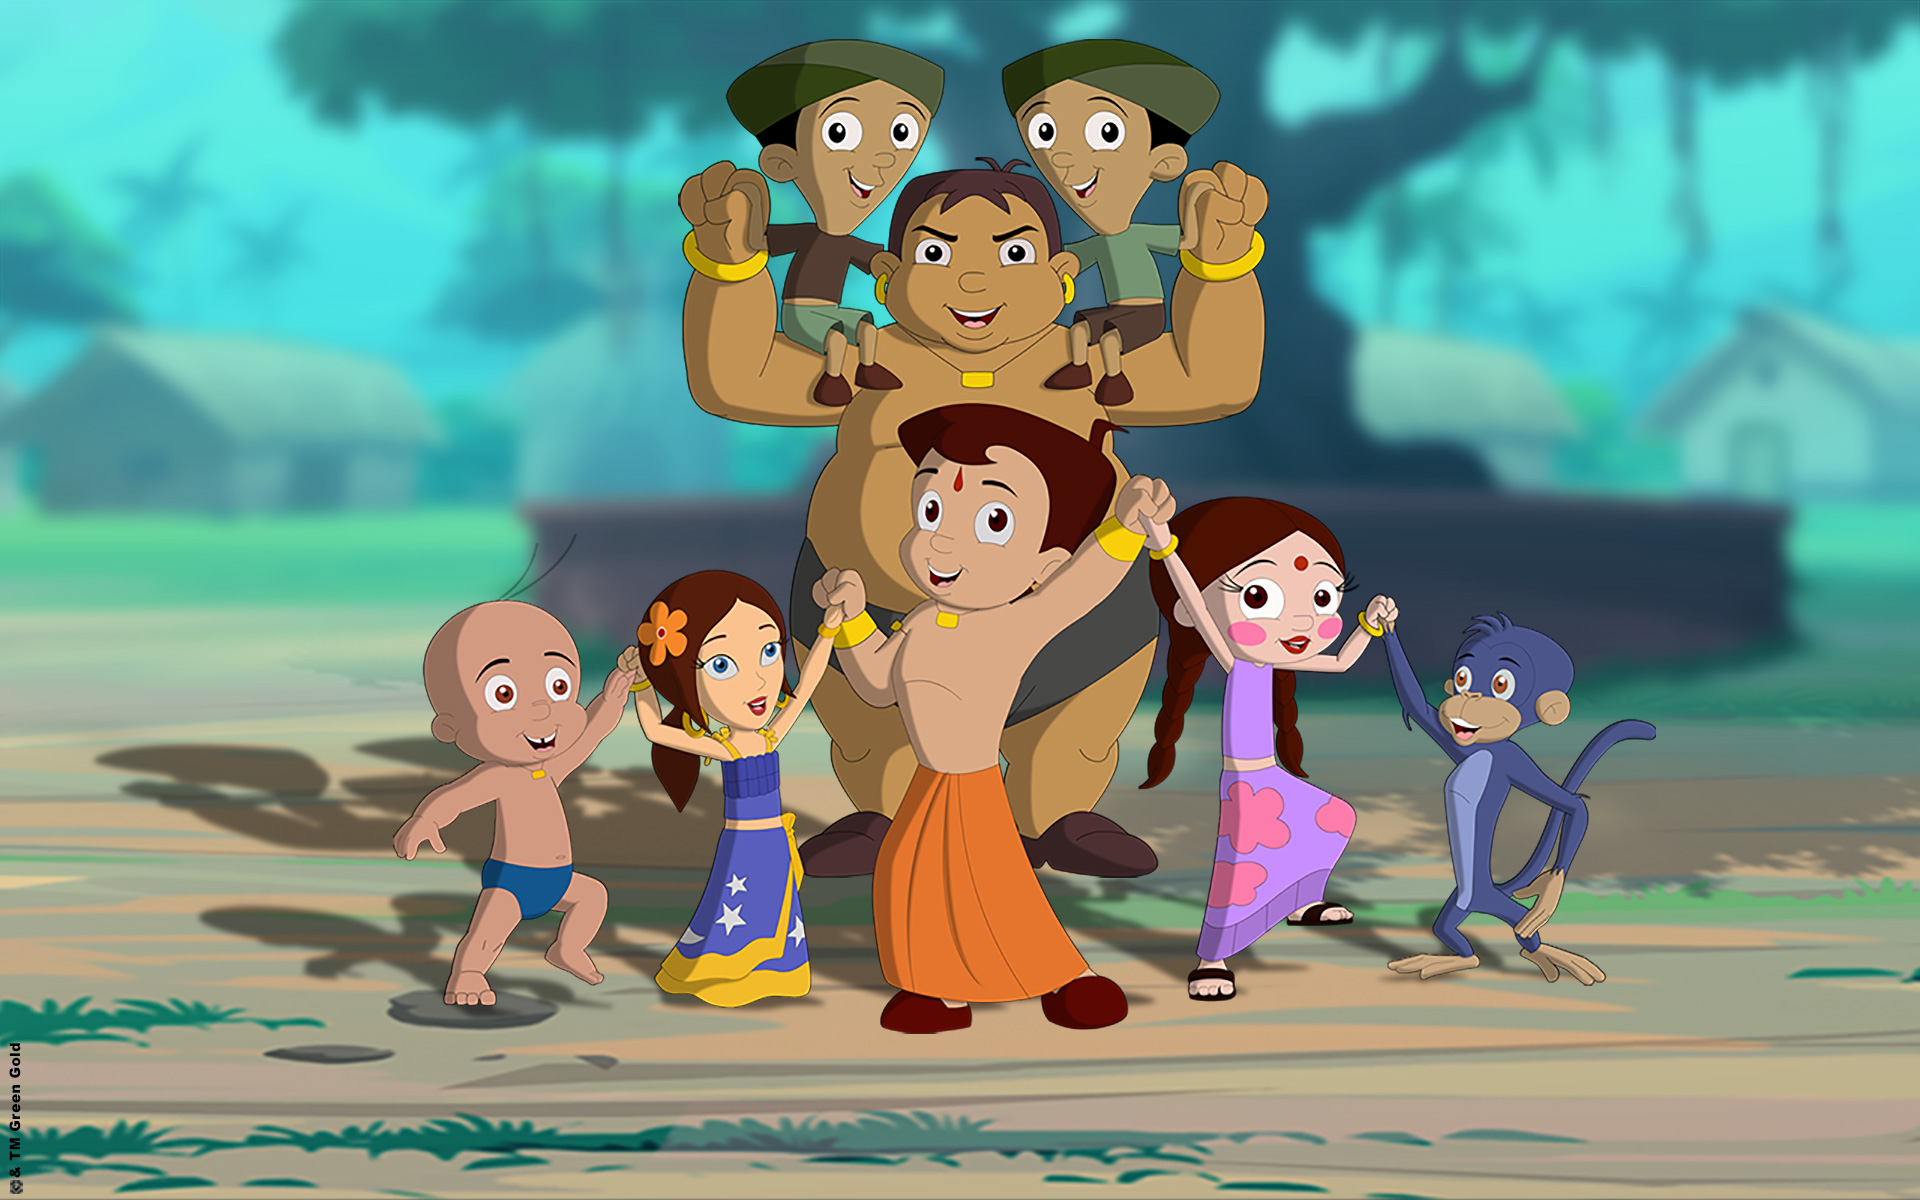 Download Chhota Bheem Wallpapers Backgrounds For FREE